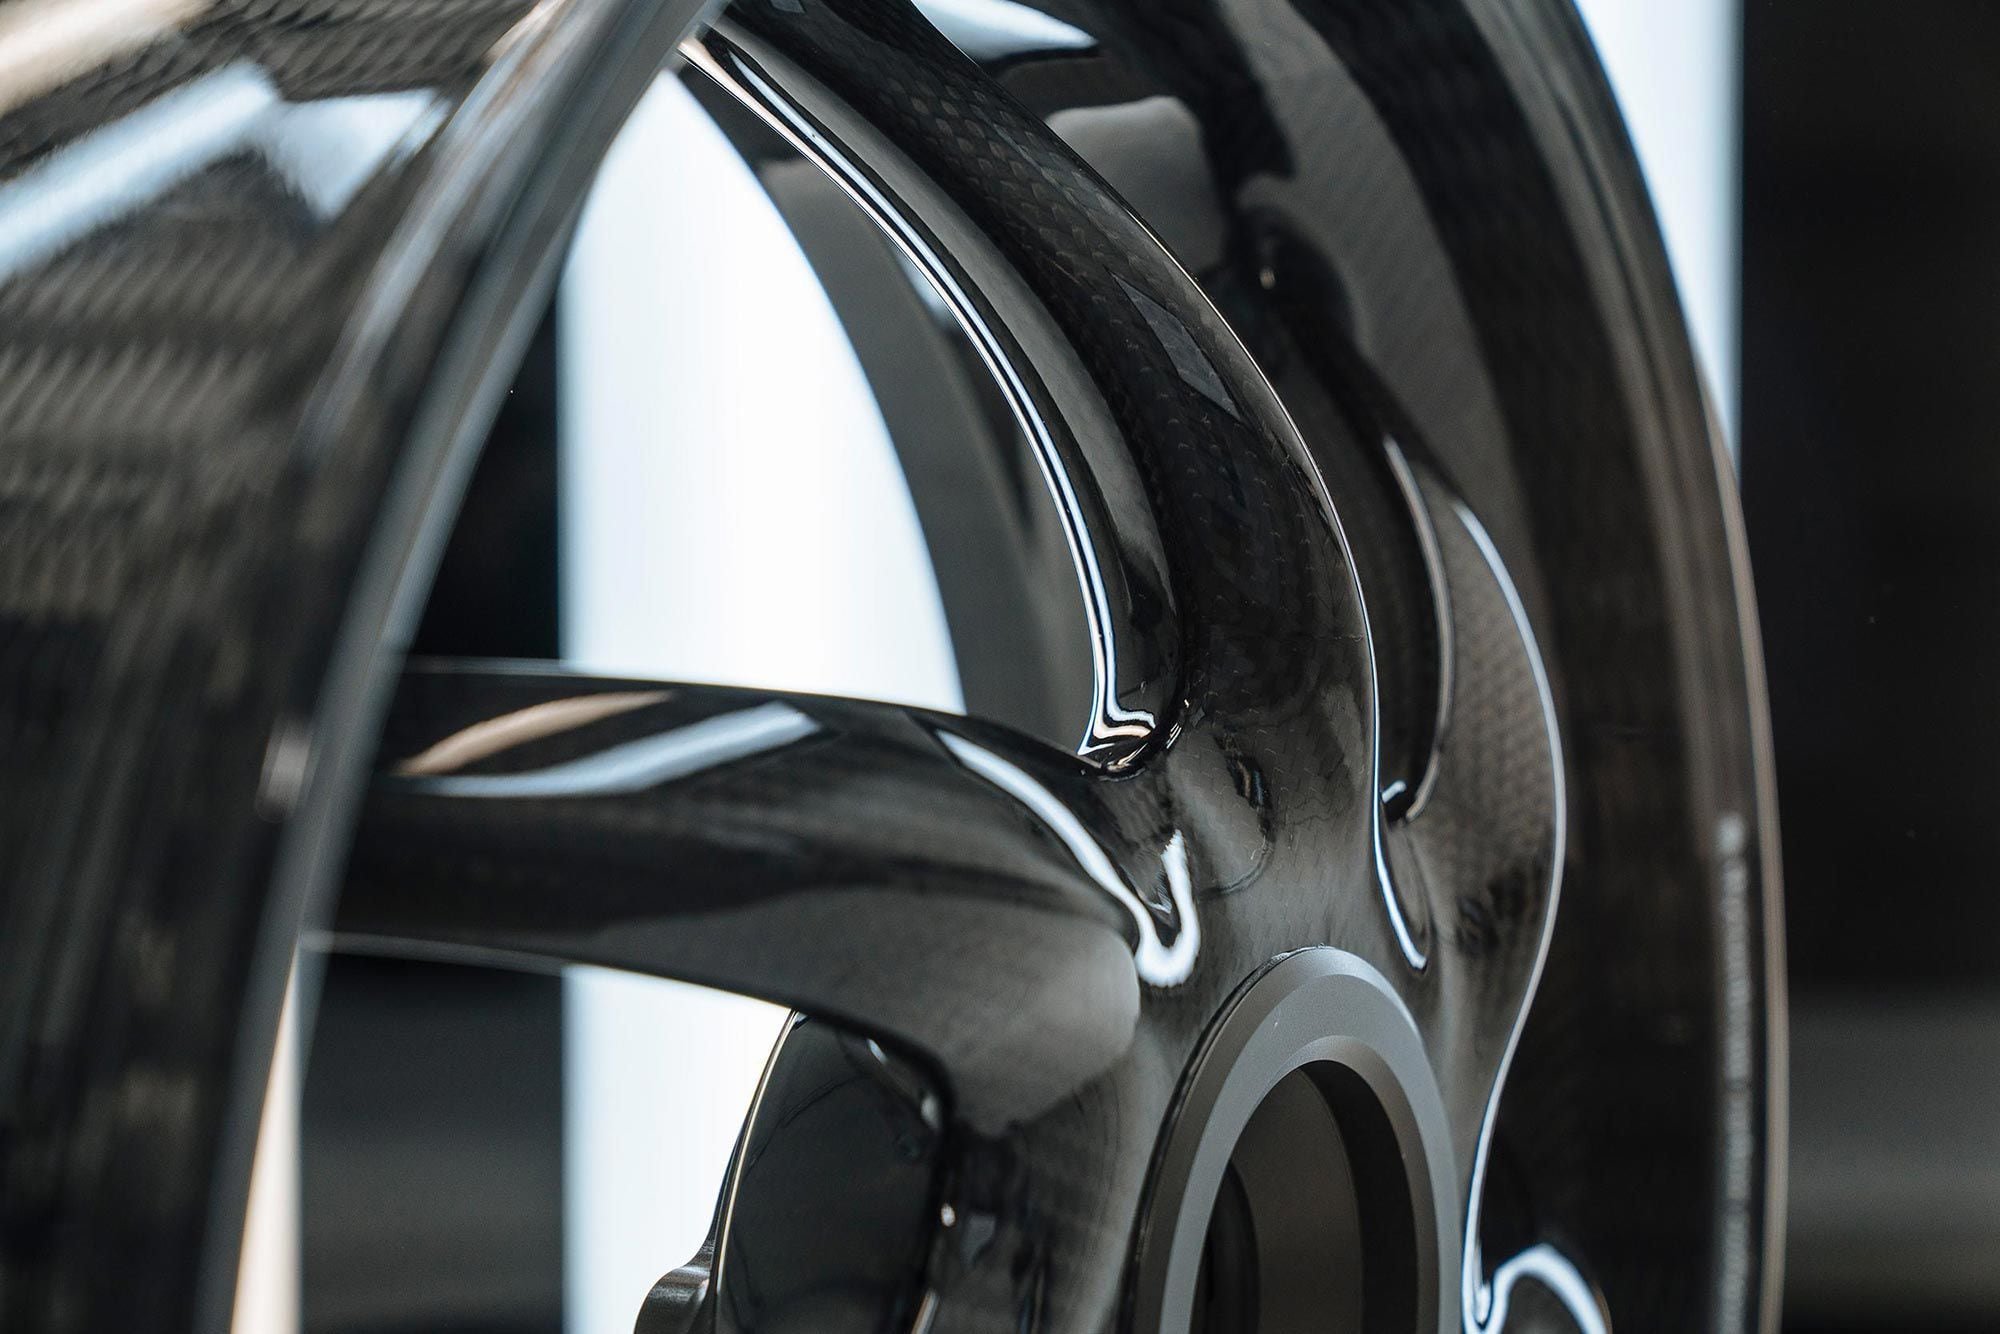 Carbon fiber motorcycle wheels have arrived. They not only look spectacular in clear coat, but can radically improve your bike’s handling response.